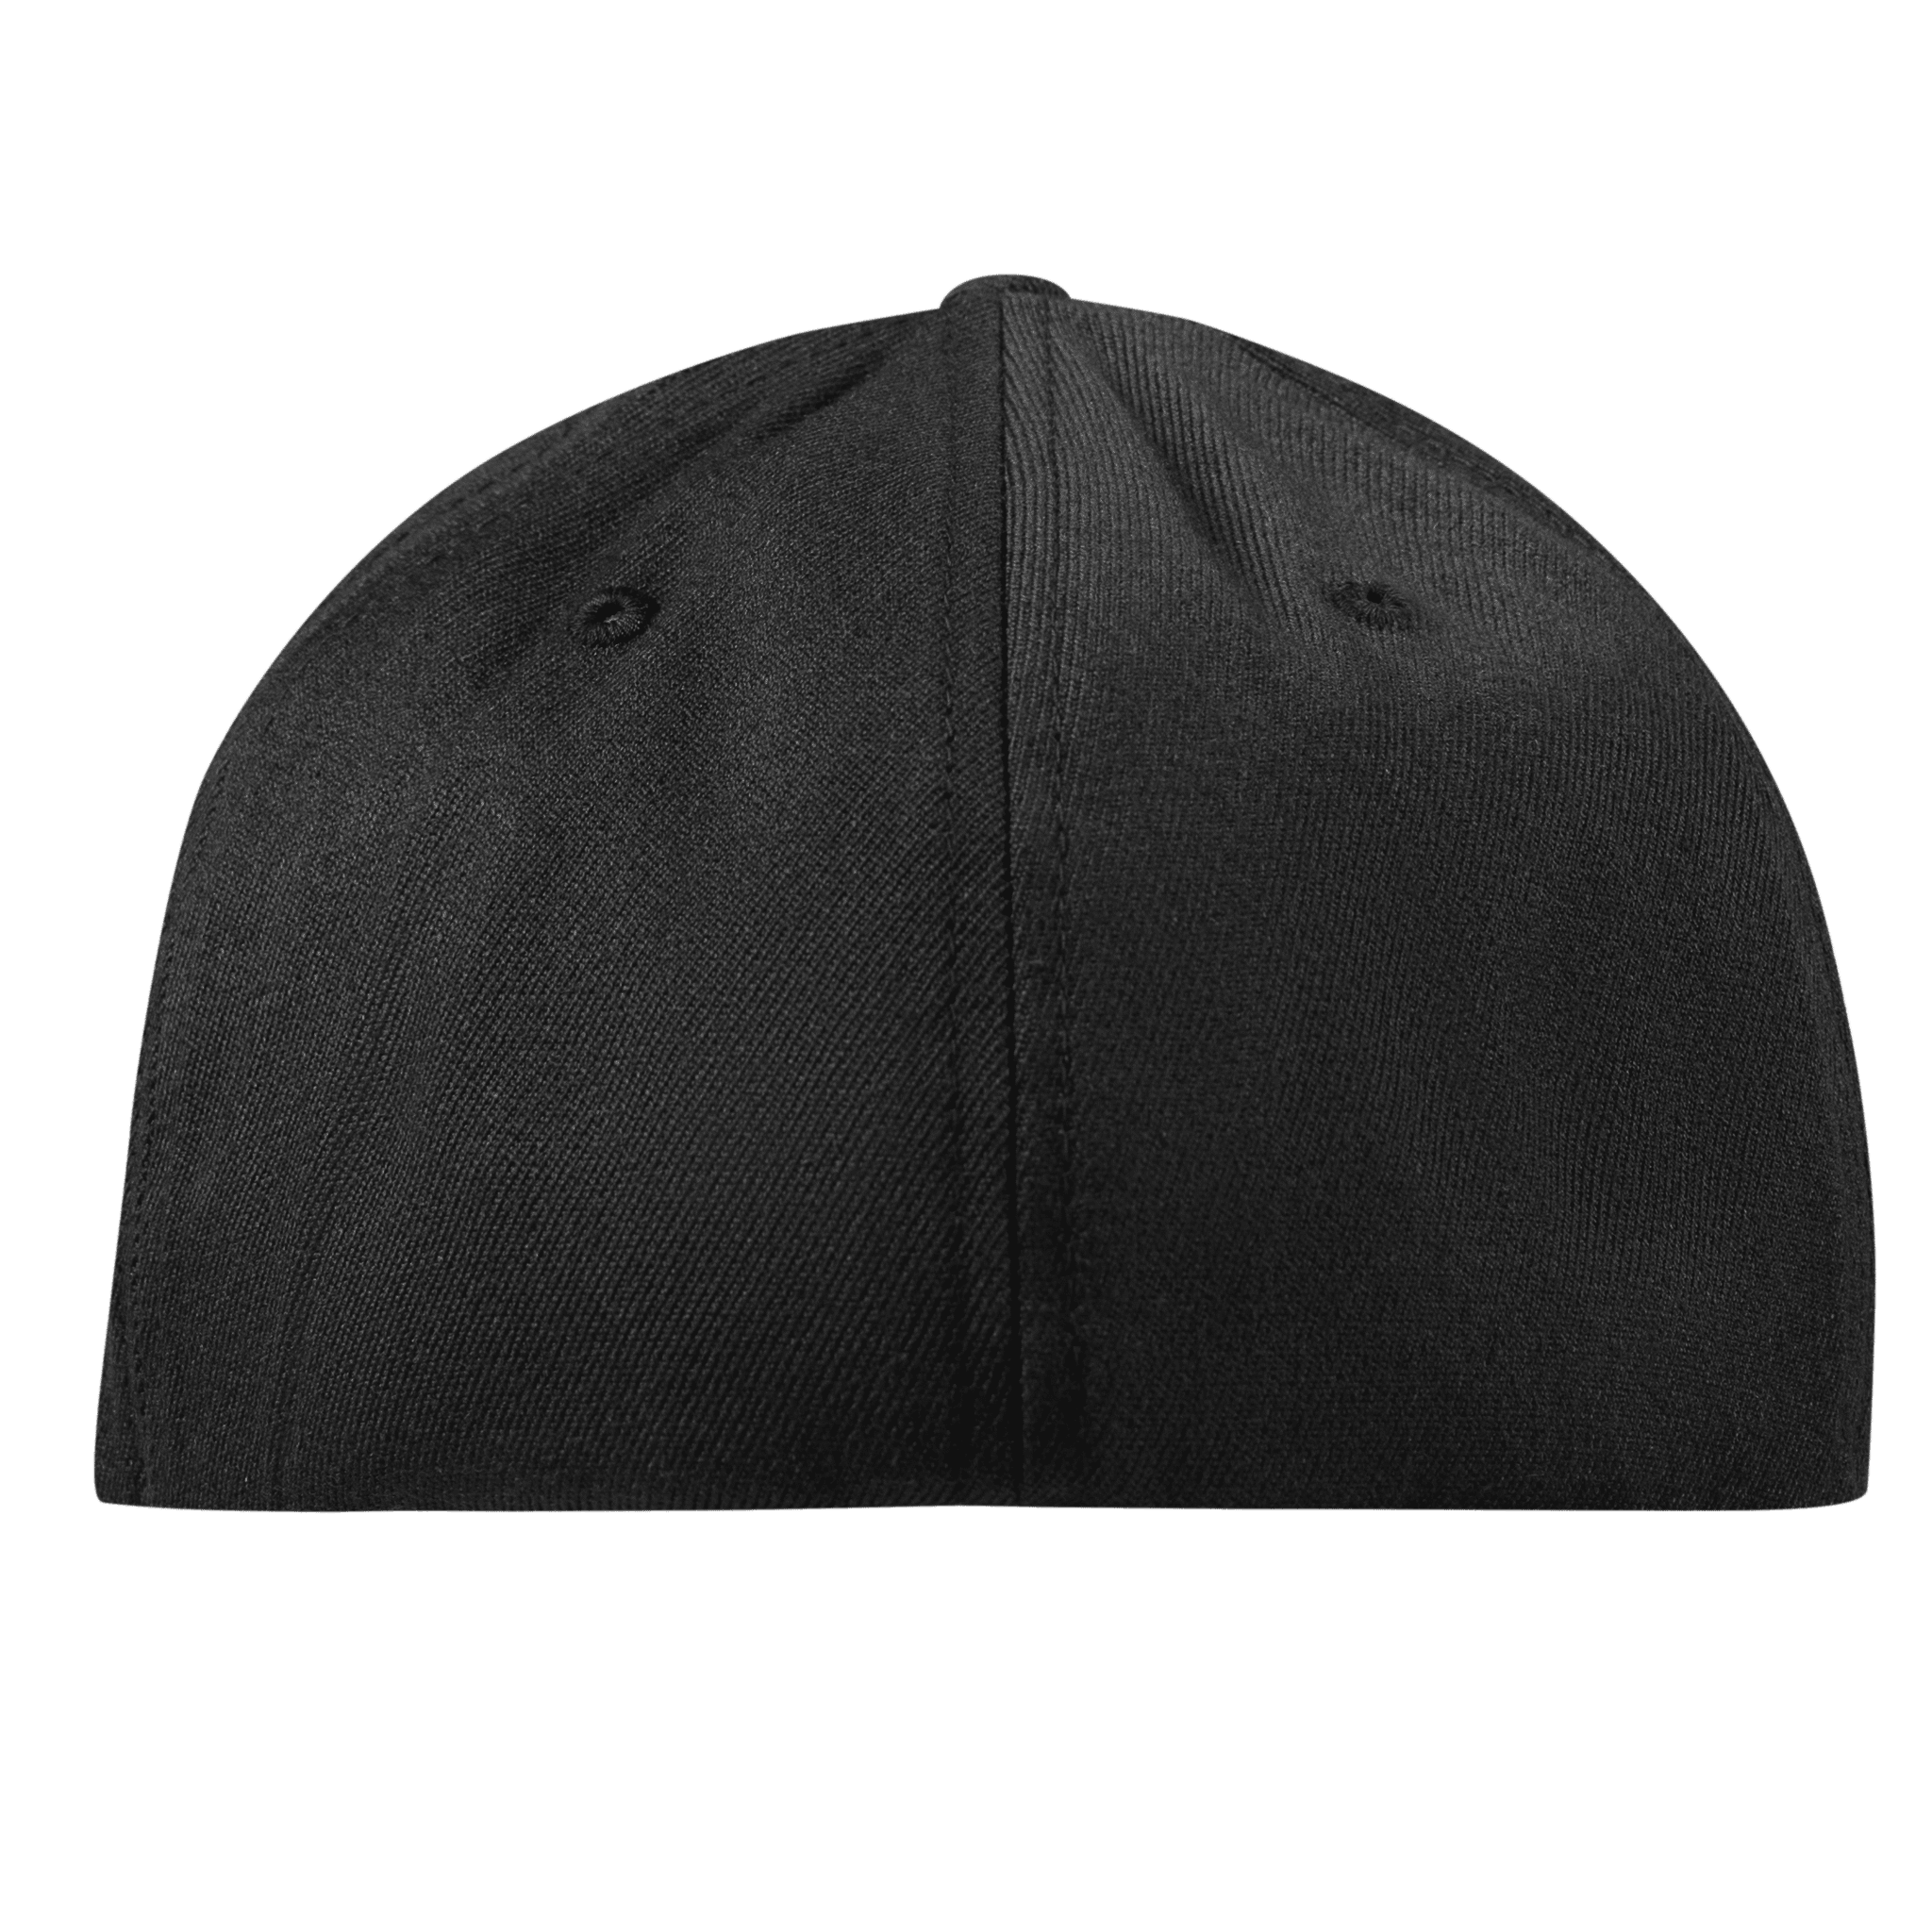 Wisconsin 30 Flexfit Fitted Back Black